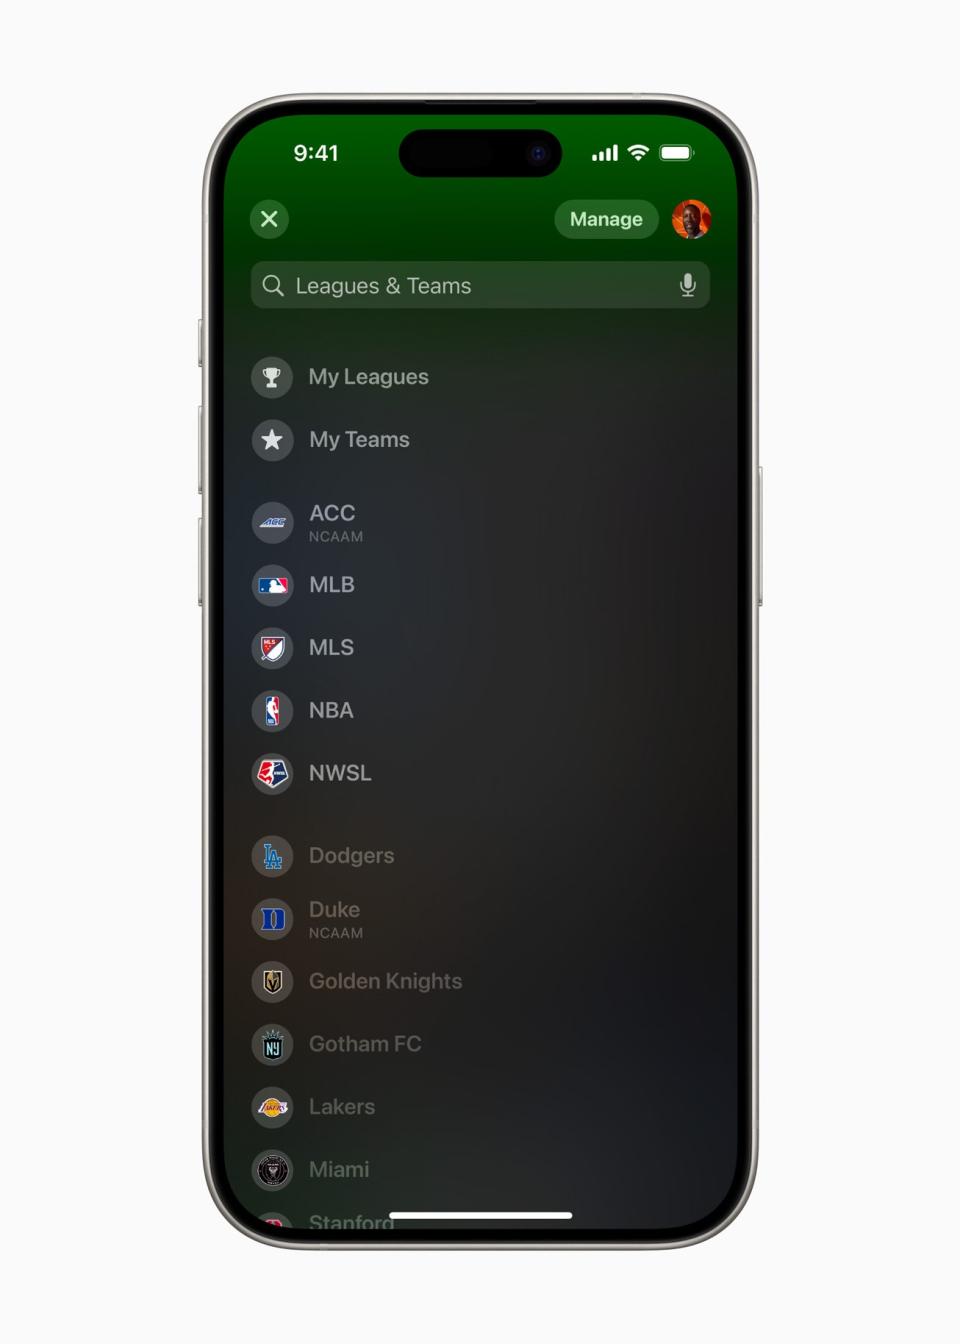 Users will be able to choose their favorite teams to follow.